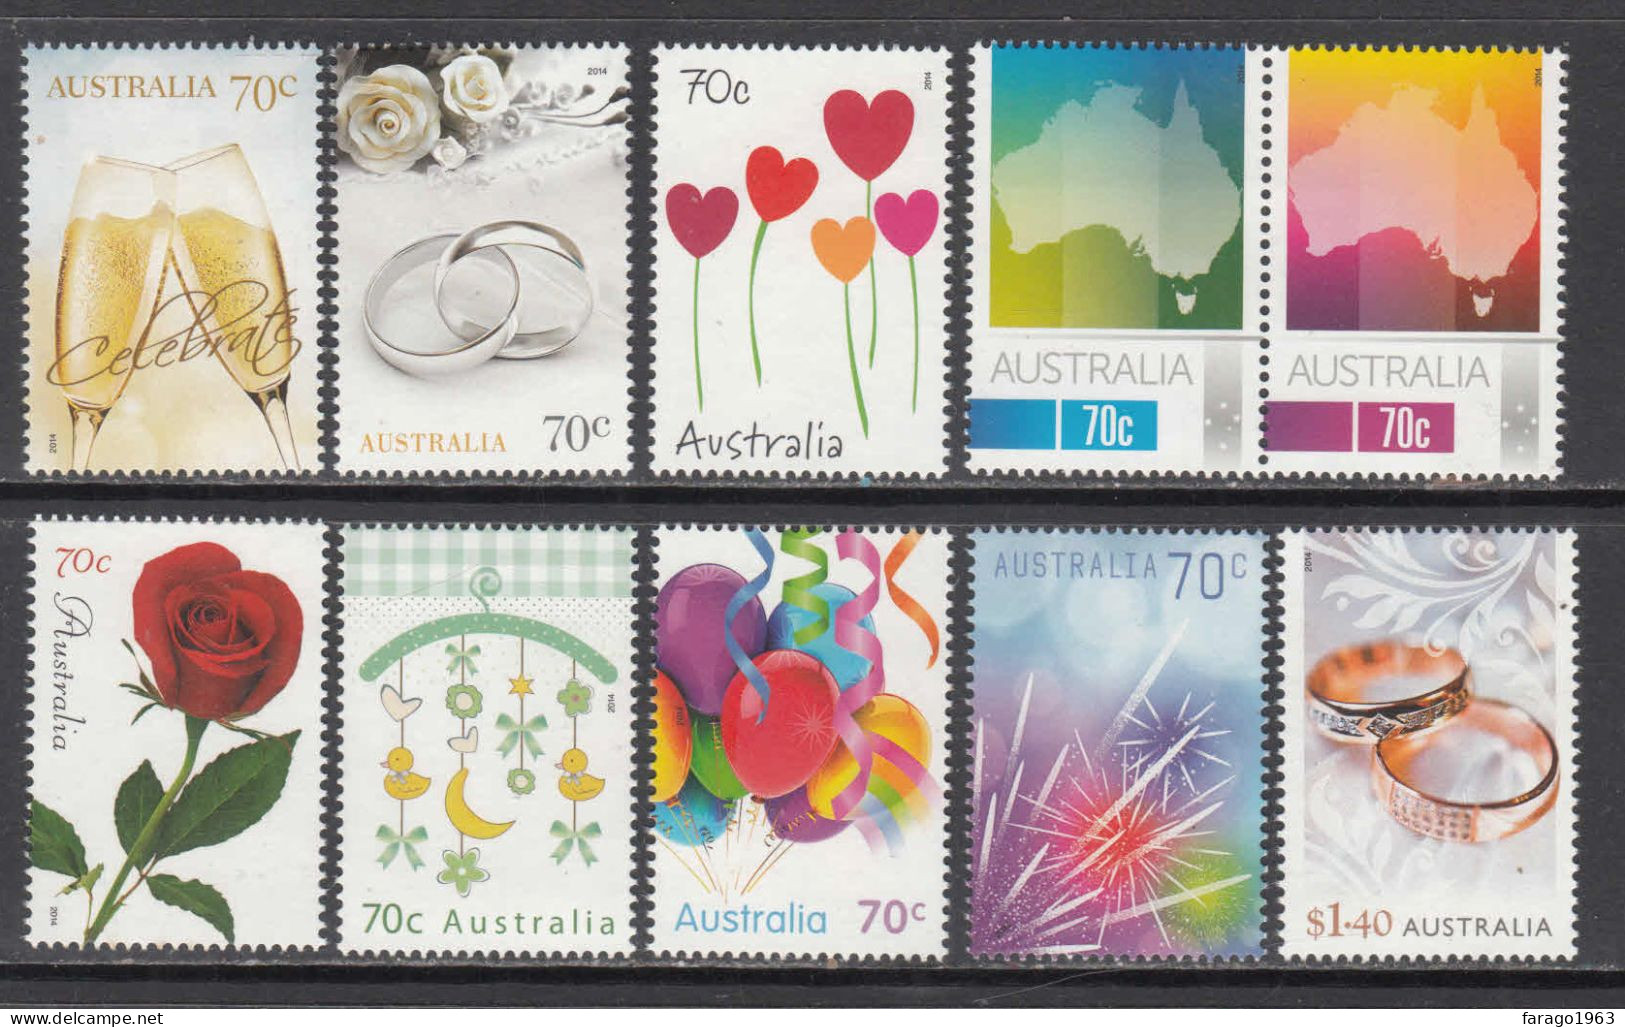 2014 Australia Greetings Complete Set Of 10 MNH @ BELOW FACE VALUE - Mint Stamps